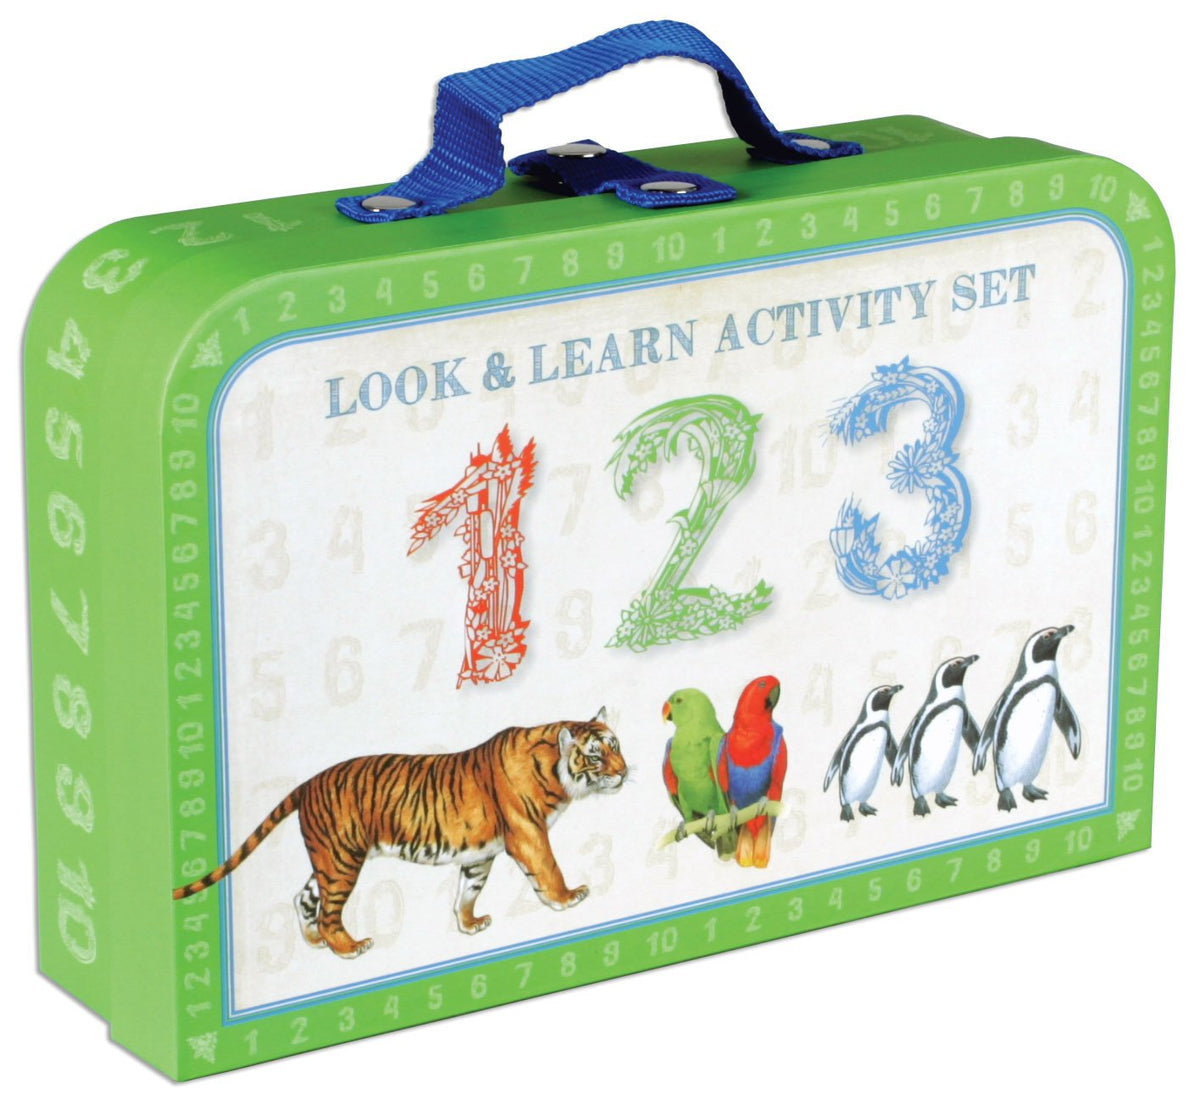 Look & Learn Activity Set - 123 (Look and Learn Activity)